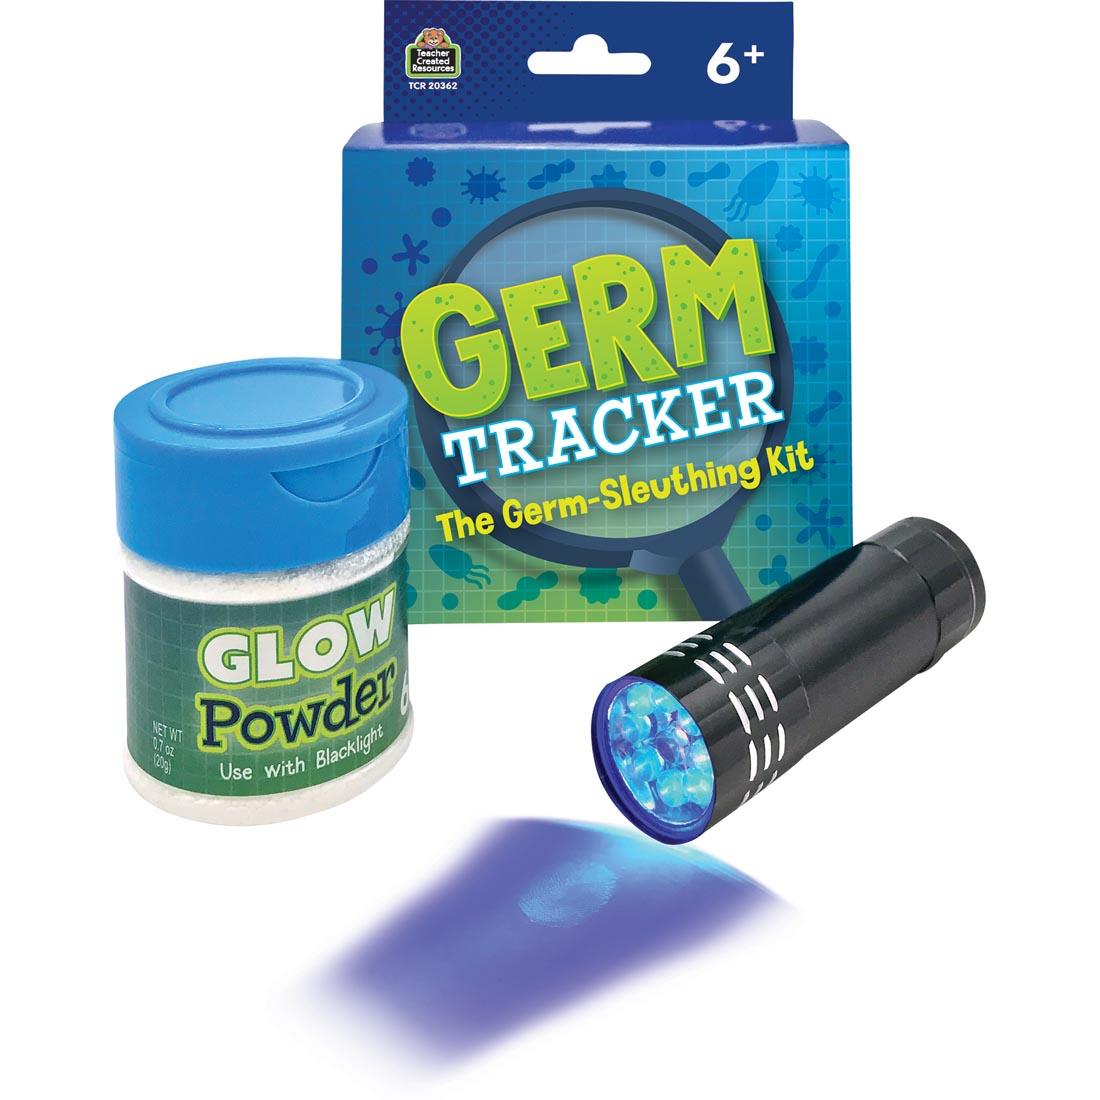 Germ Tracker The Germ Sleuthing Kit